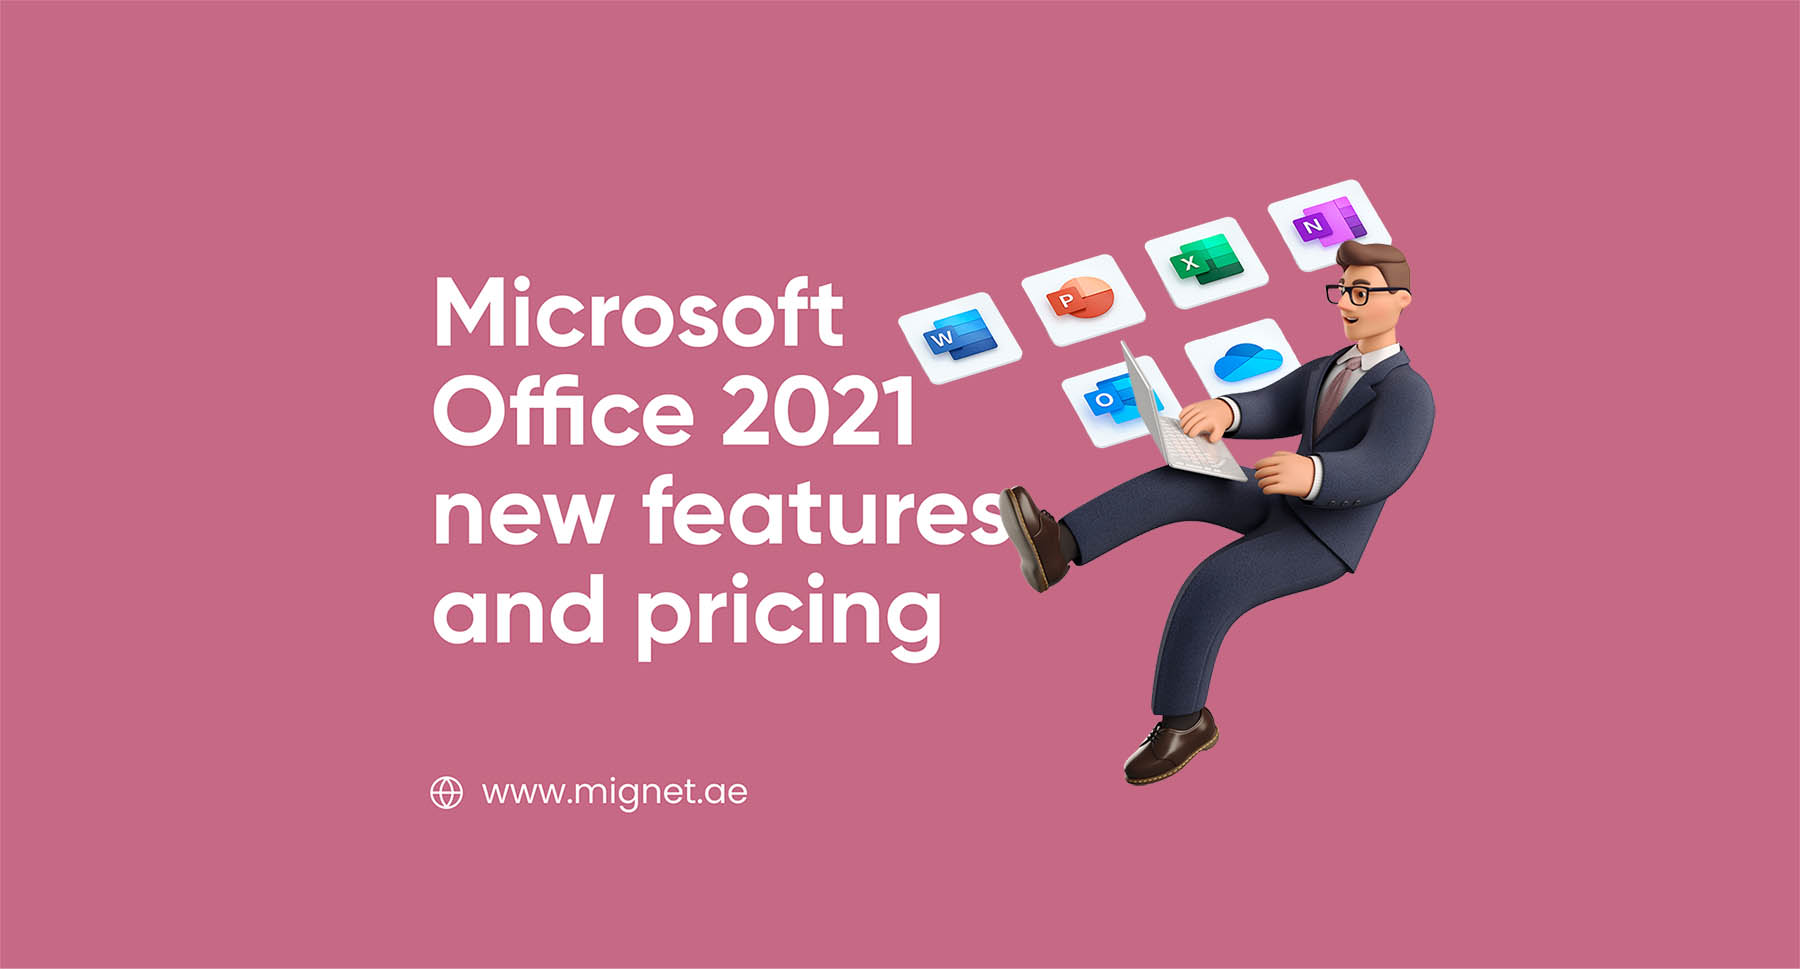 Microsoft Office 2021 new features and pricing